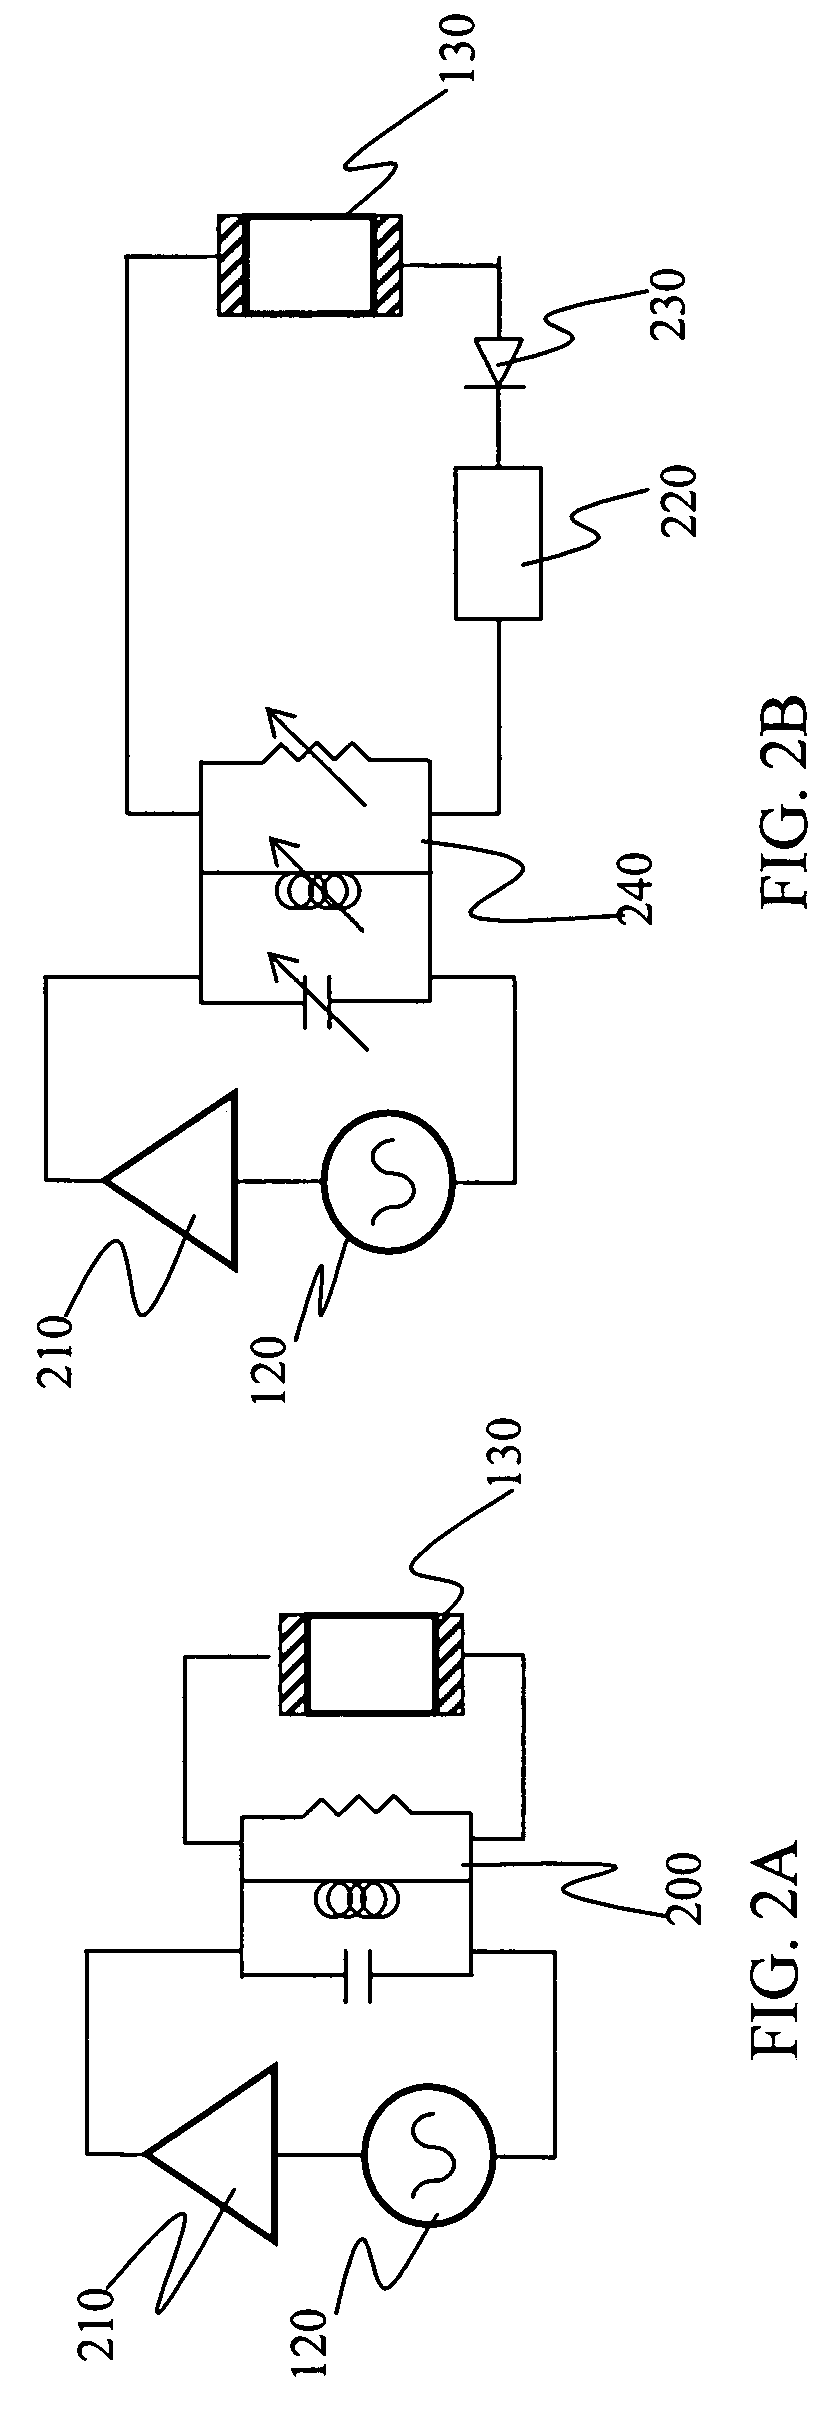 External resonator/cavity electrode-less plasma lamp and method of exciting with radio-frequency energy